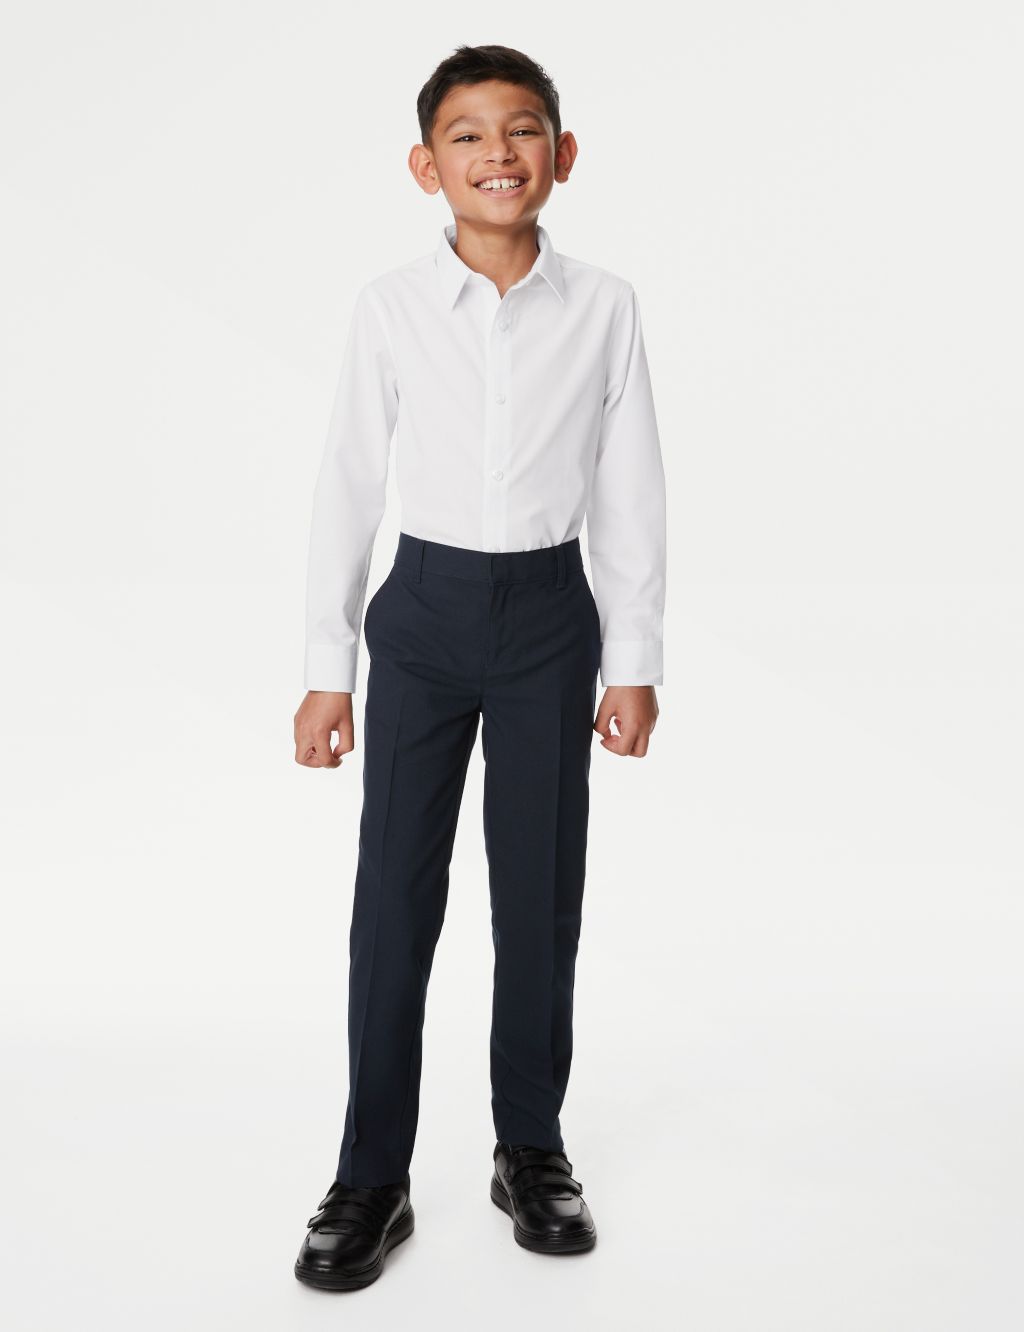 Adaptive Clothing for Kids | Assisted Dressing | M&S